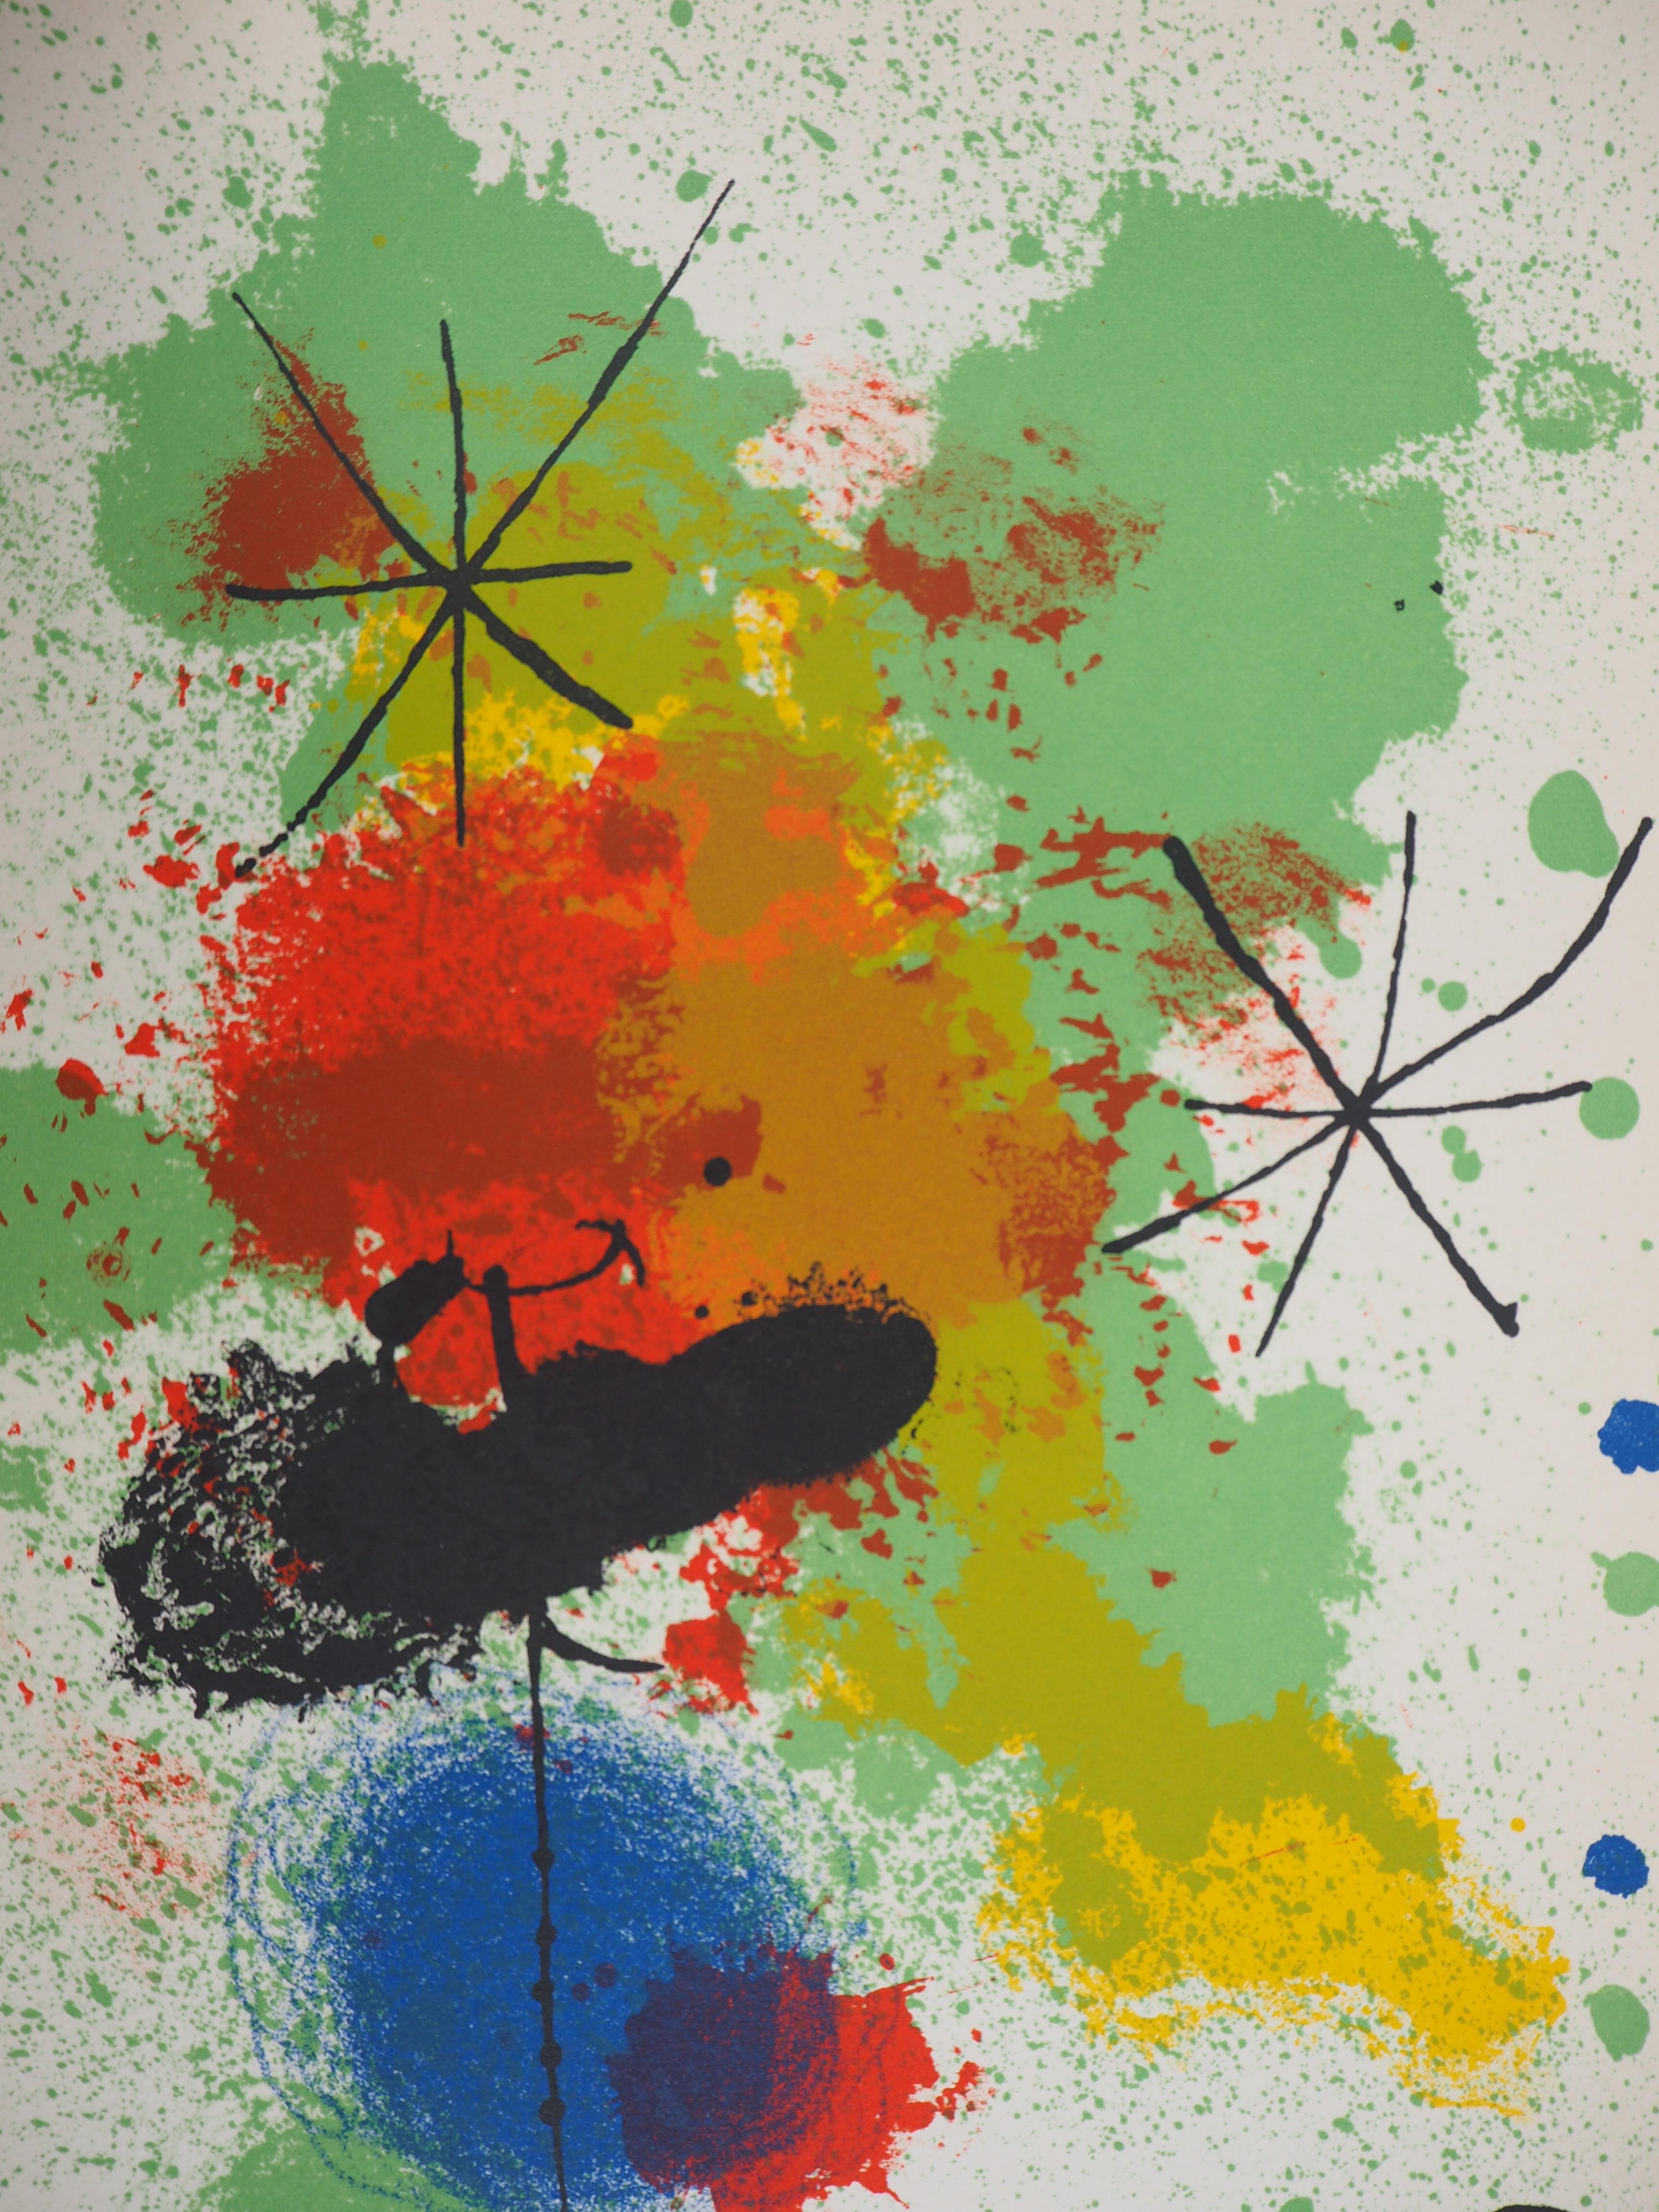 Composition with Stars - Original lithograph (Mourlot) - Modern Print by Joan Miró